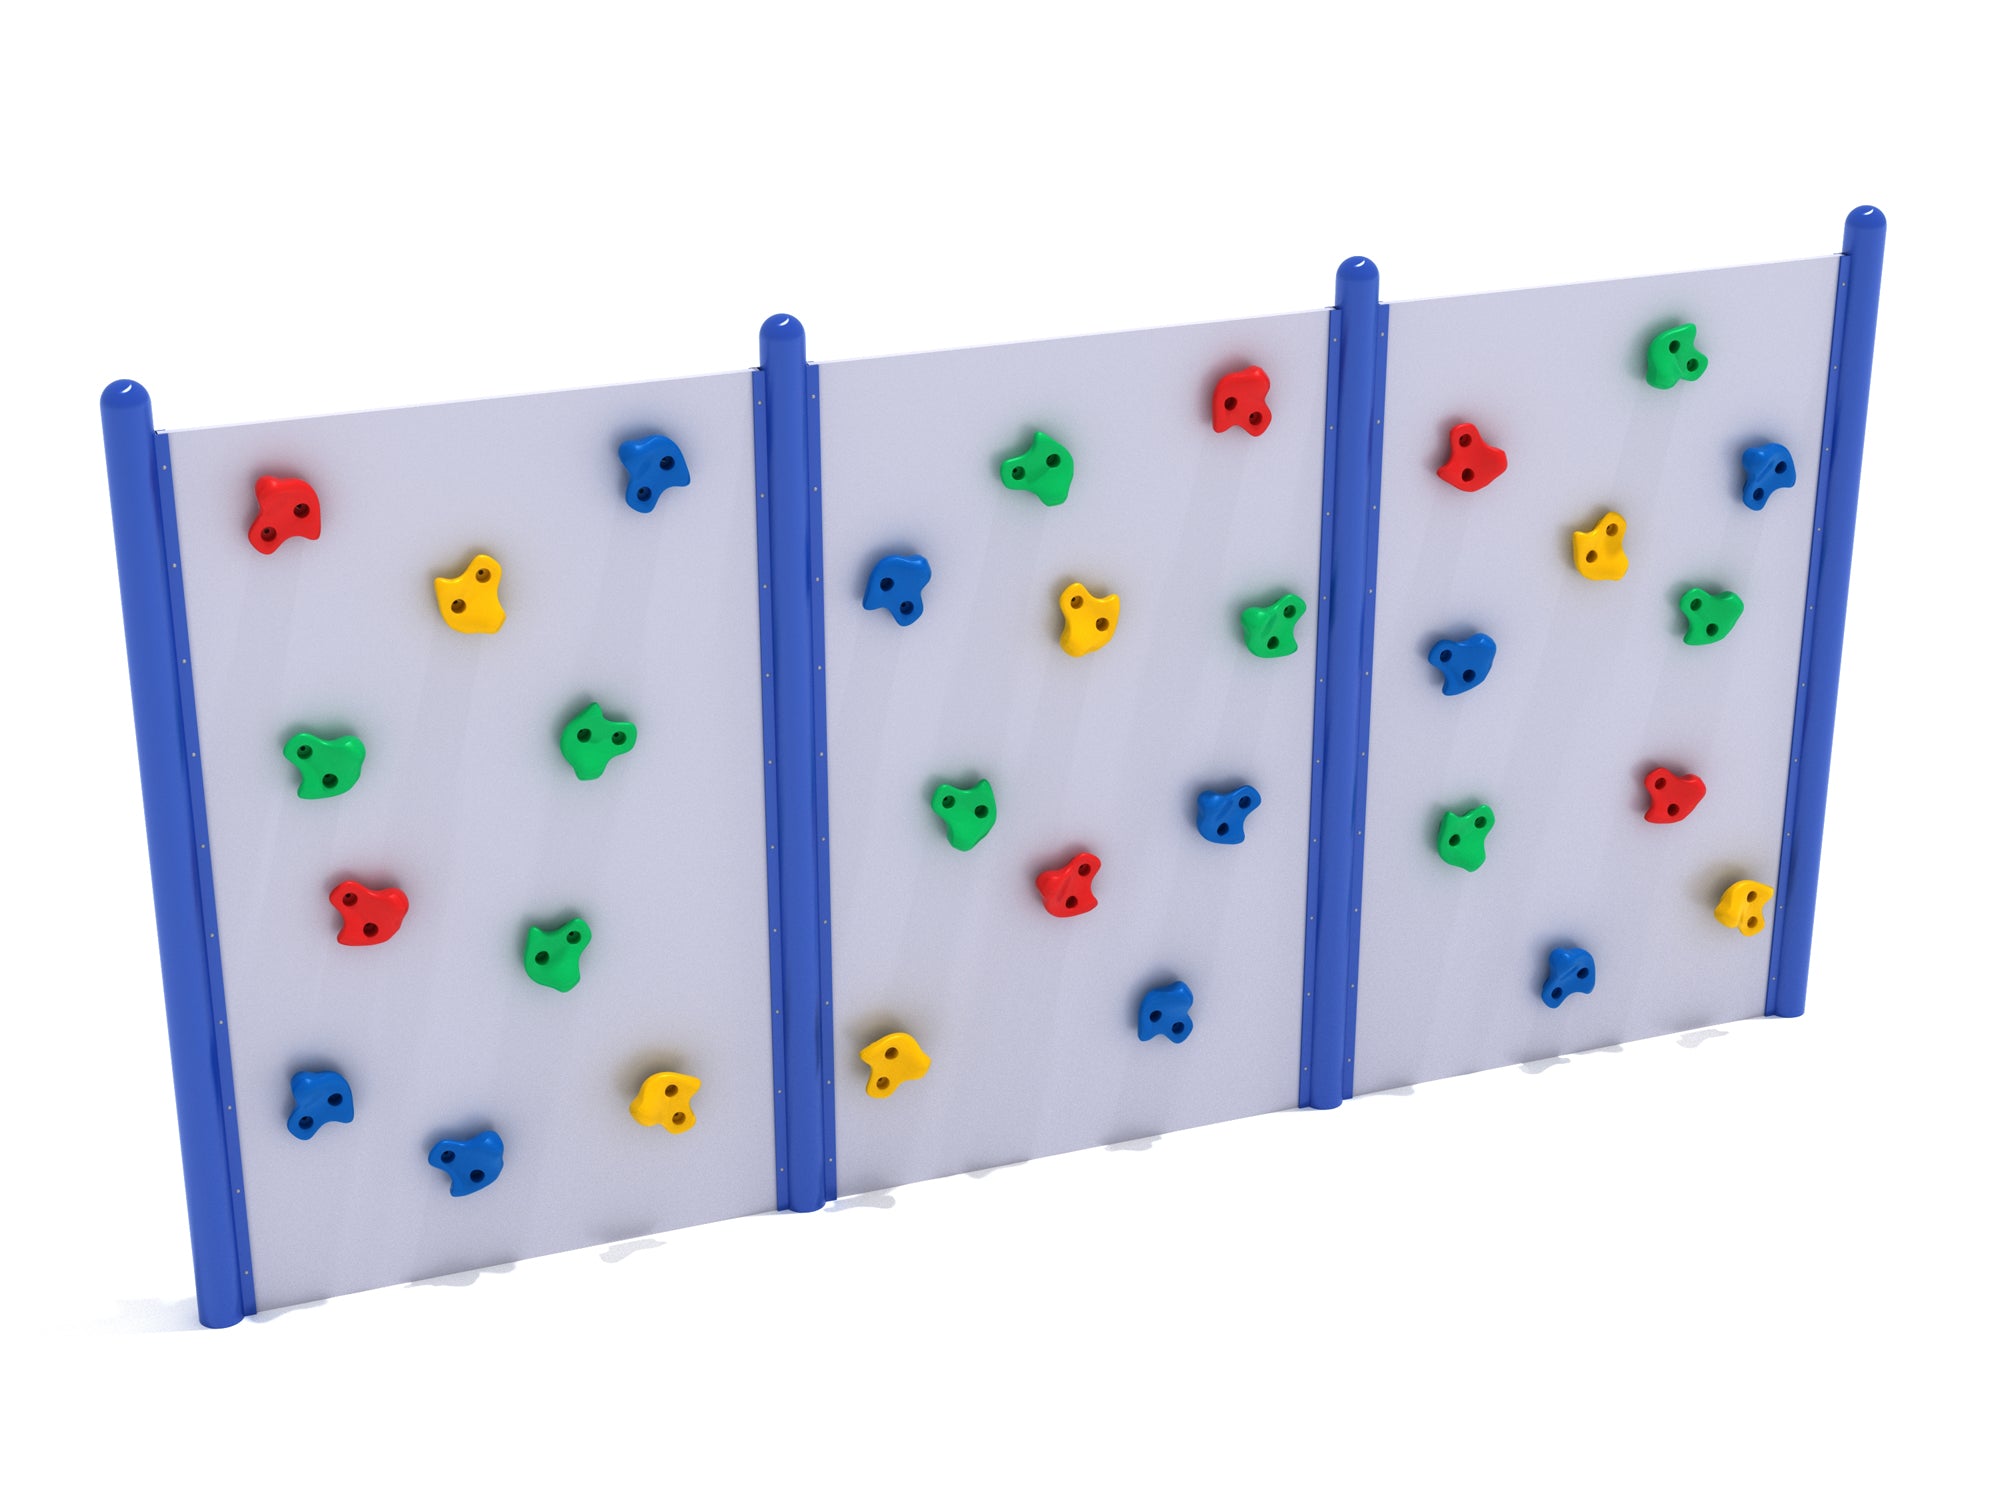 Playground-Equipment-Commercial-3-Panel-Standard-Wall-Climber-Front